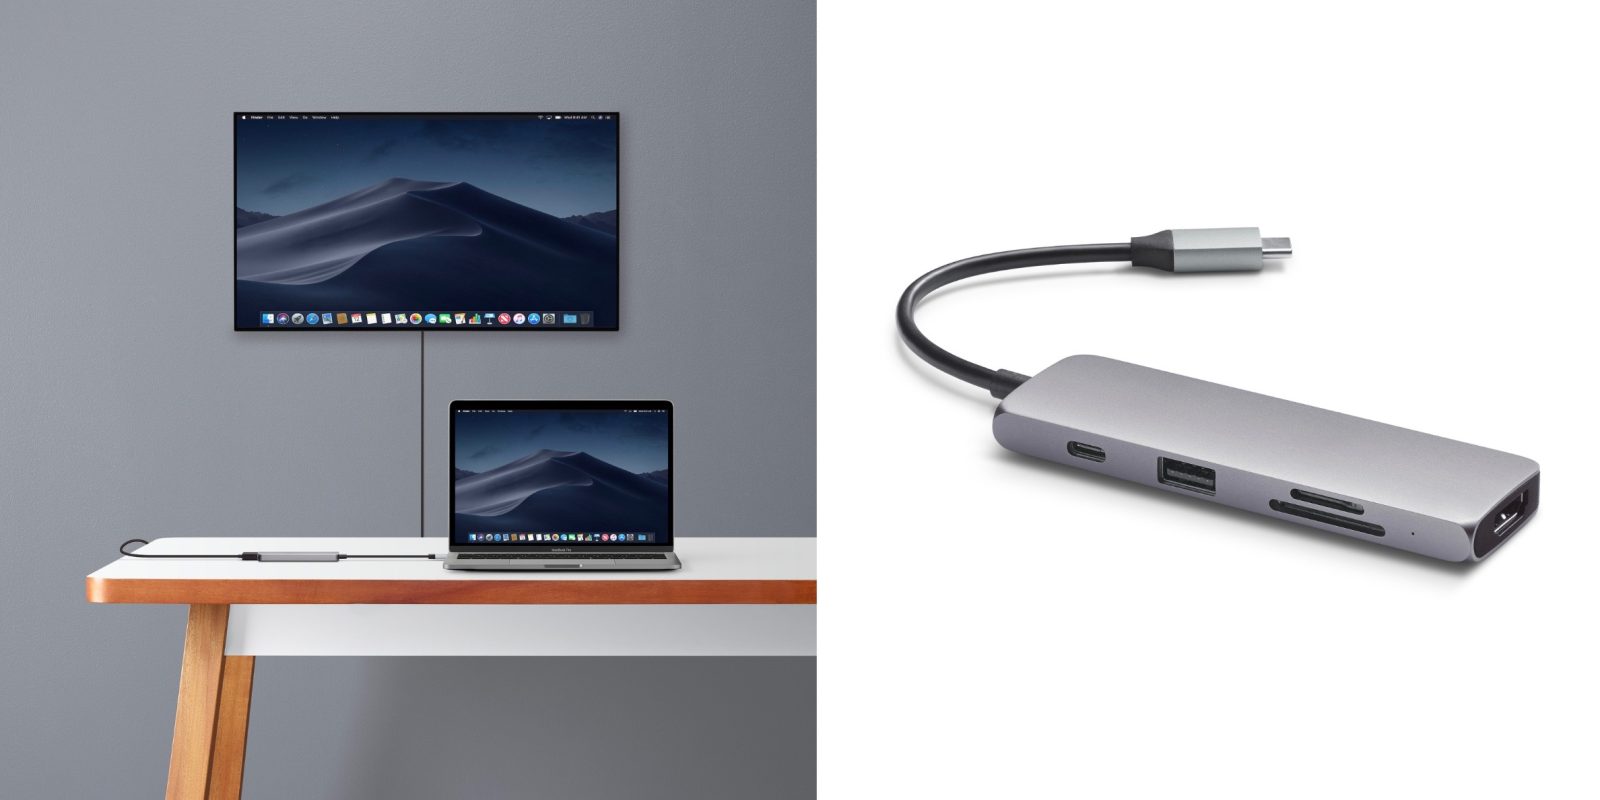 How to Use USB C Multiport to Connect MAC PRO to VGA Connector